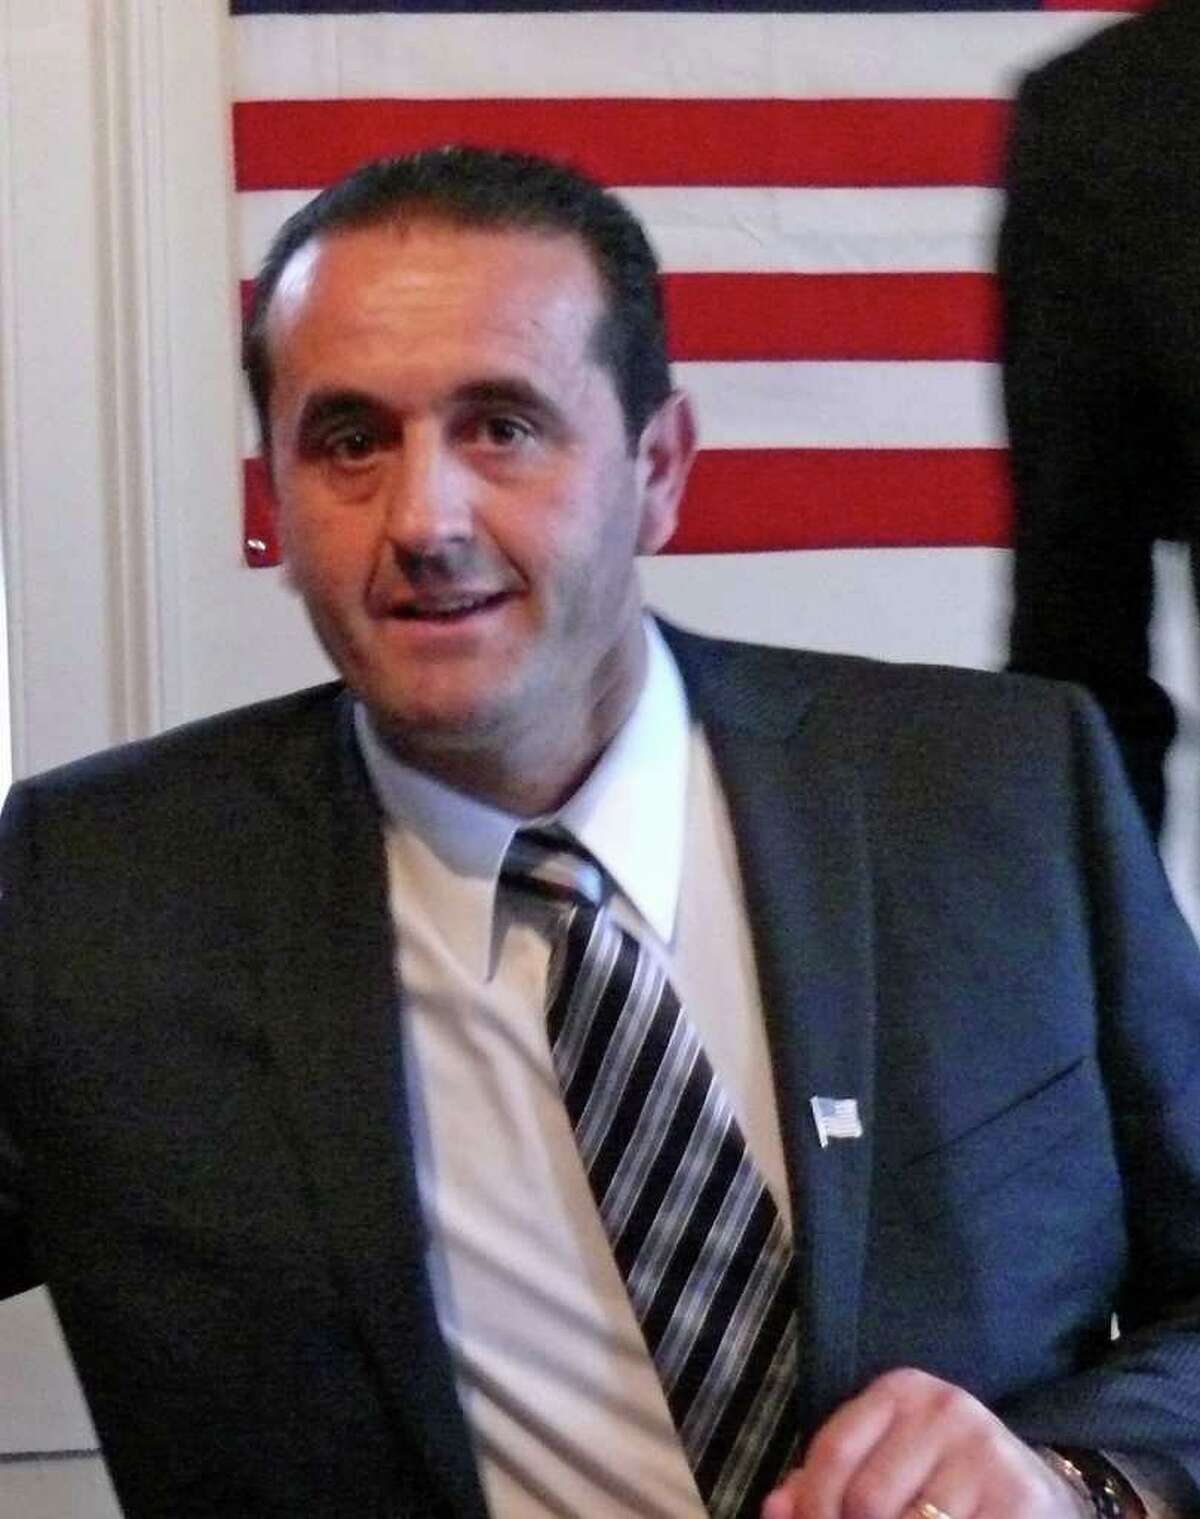 Peter Lumaj, a local resident and attorney, has announced he will seek the Republican nomination for U.S. Senate.